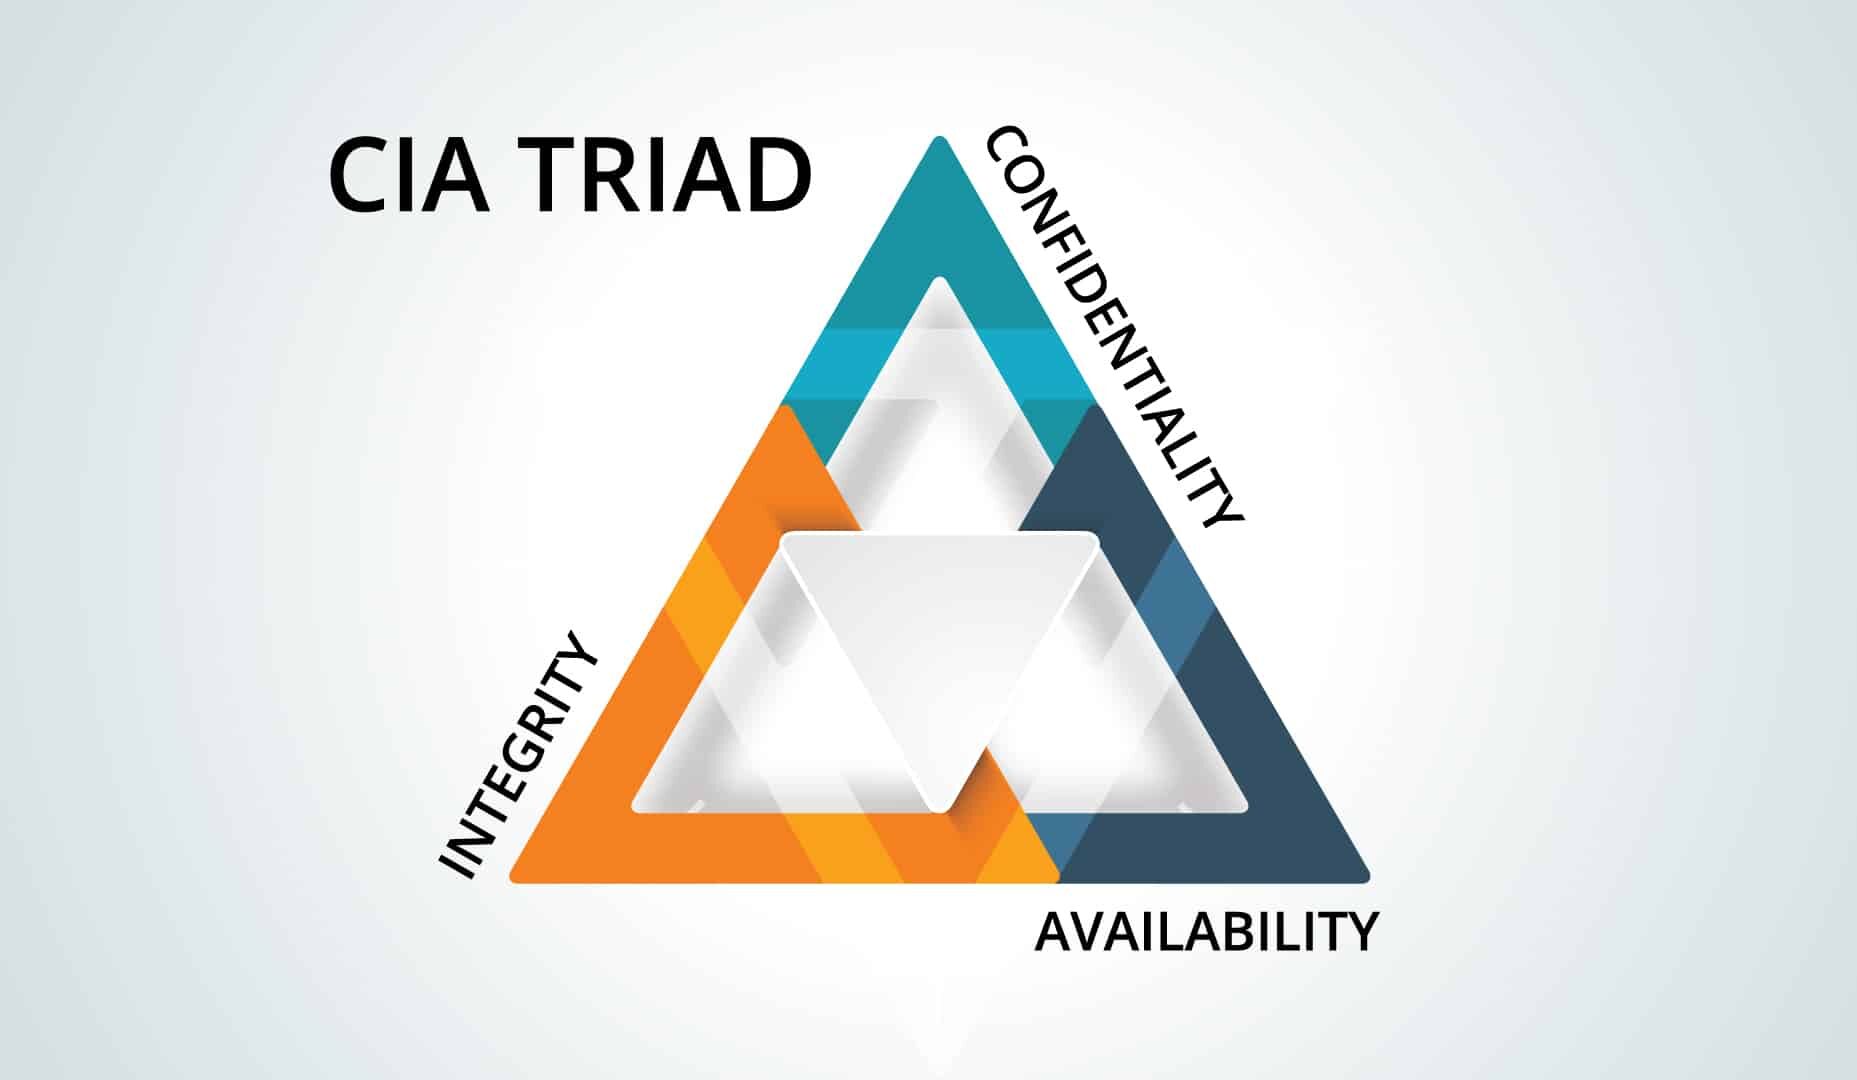 What Is The CIA Triad?